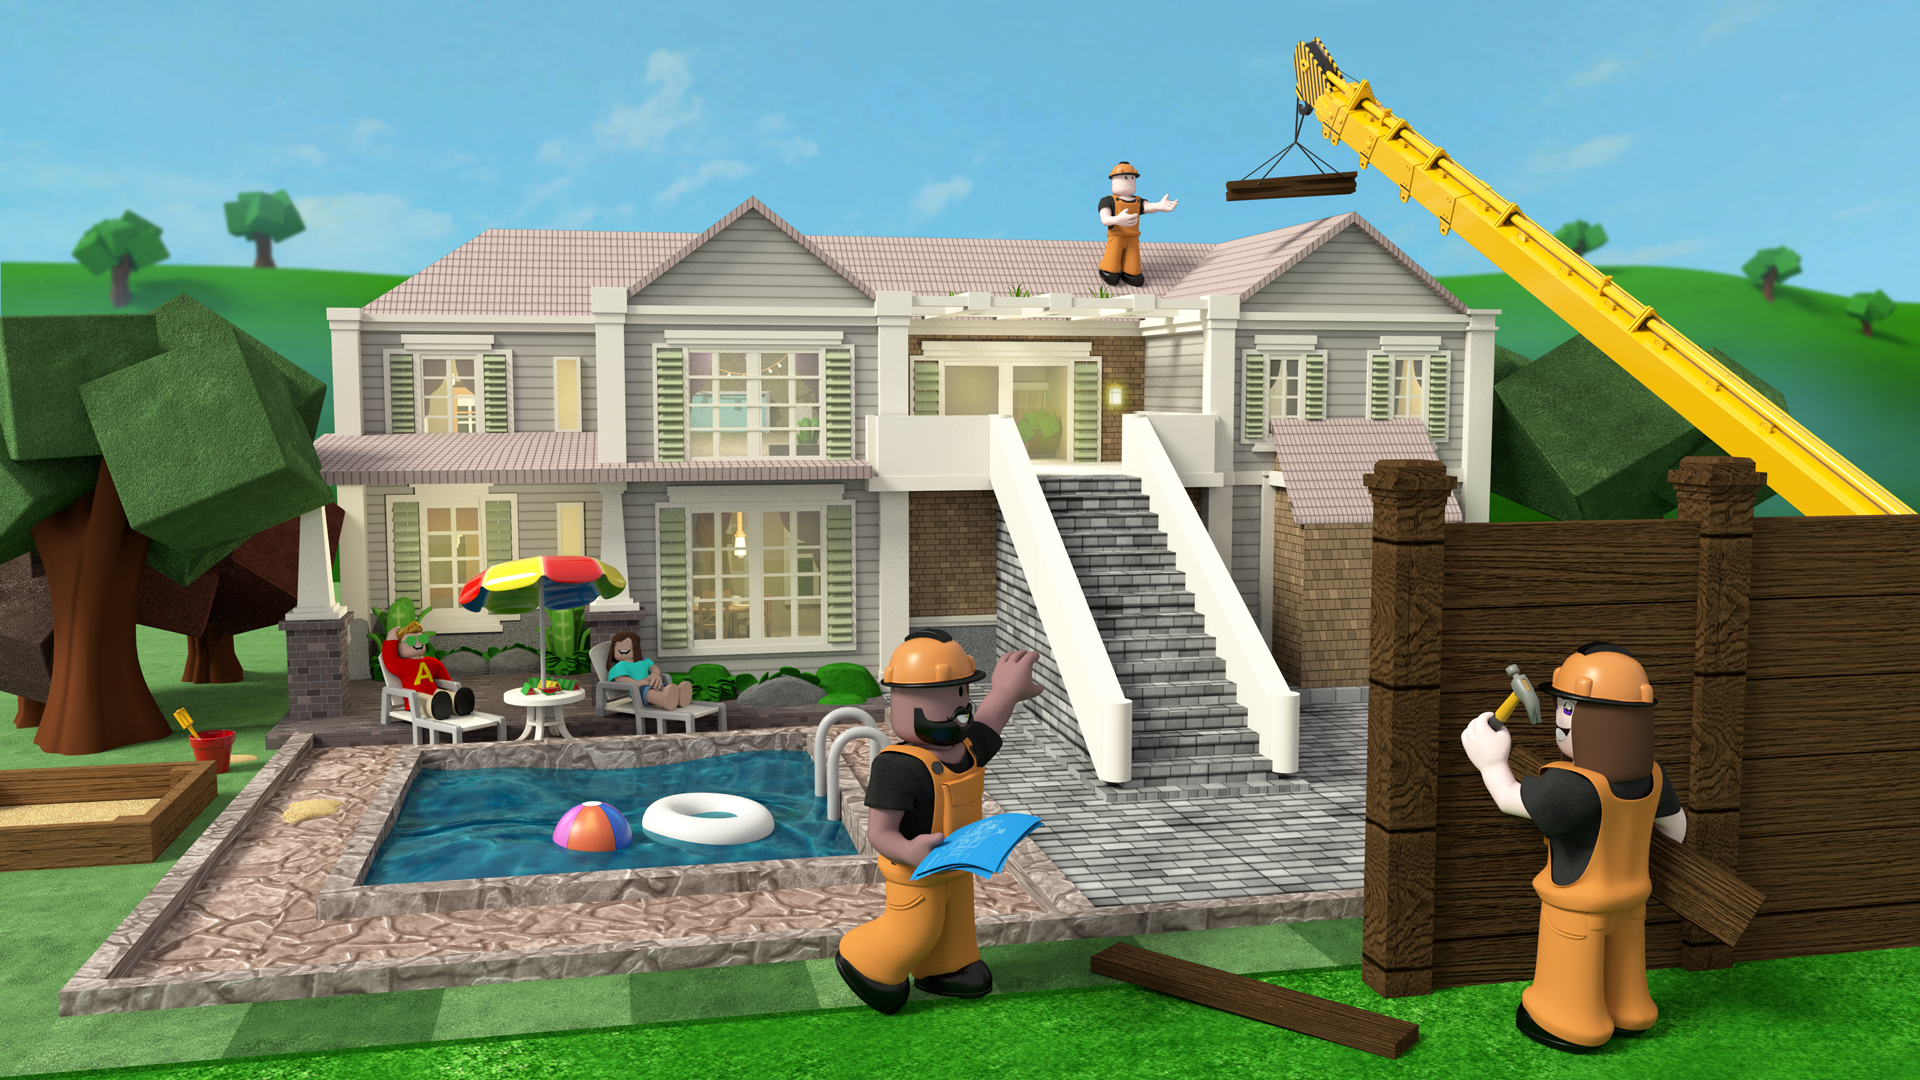 An Inside Look At Roblox The Gaming Universe That S Exploded To 164 000 000 Users By Spero Ventures Spero Ventures Sep 2020 Medium - roblox called me bad news